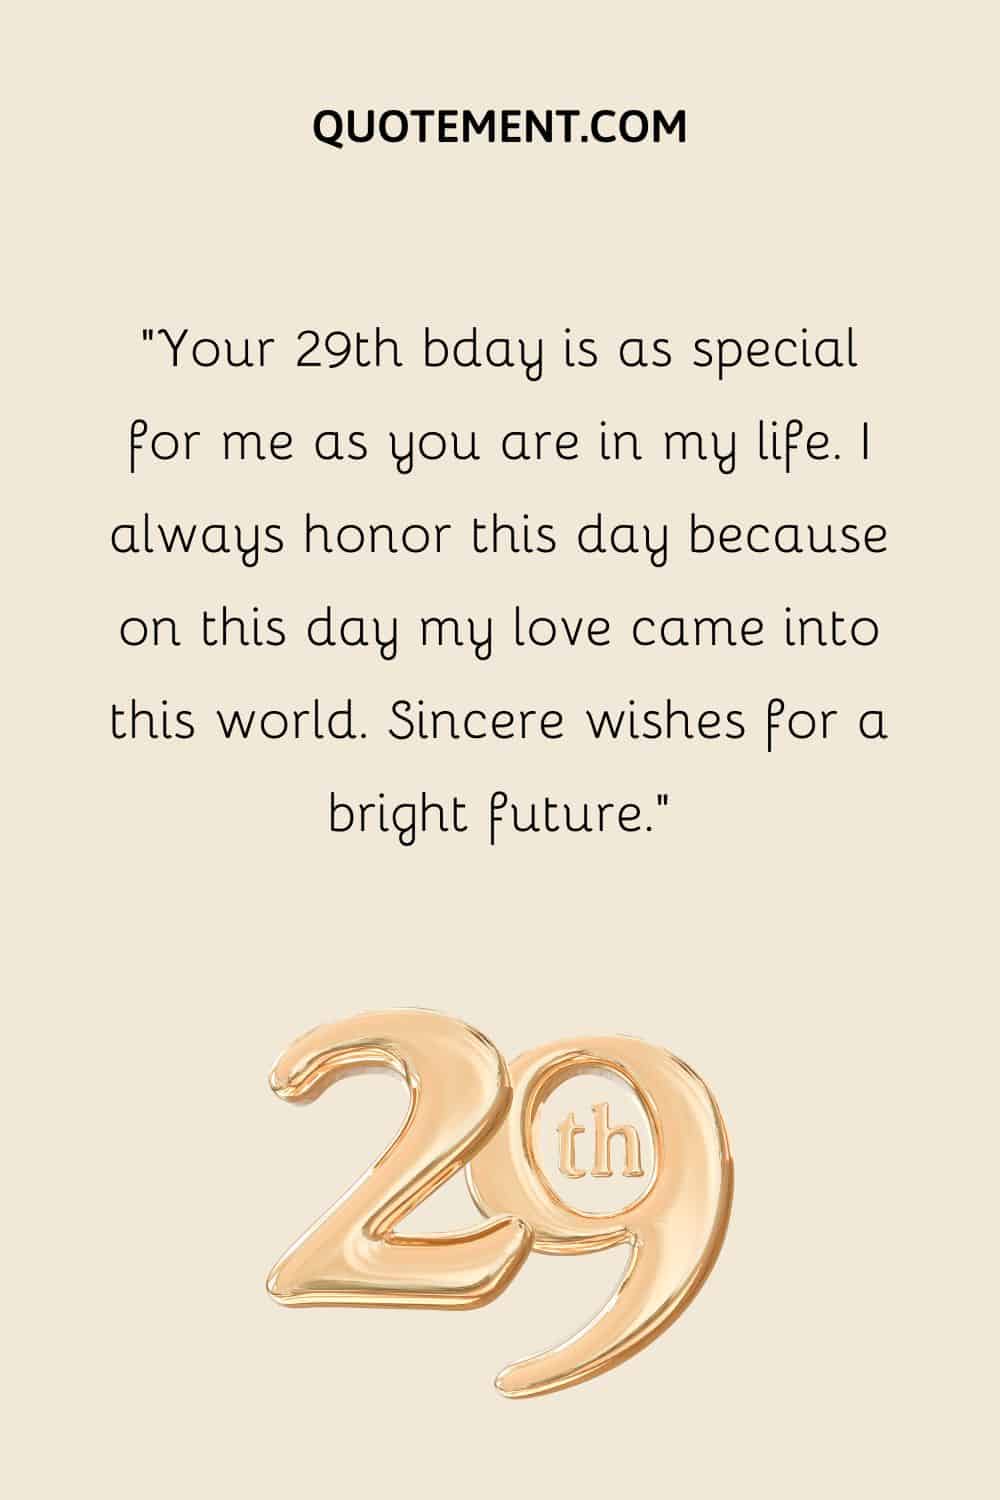 Your 29th bday is as special for me as you are in my life